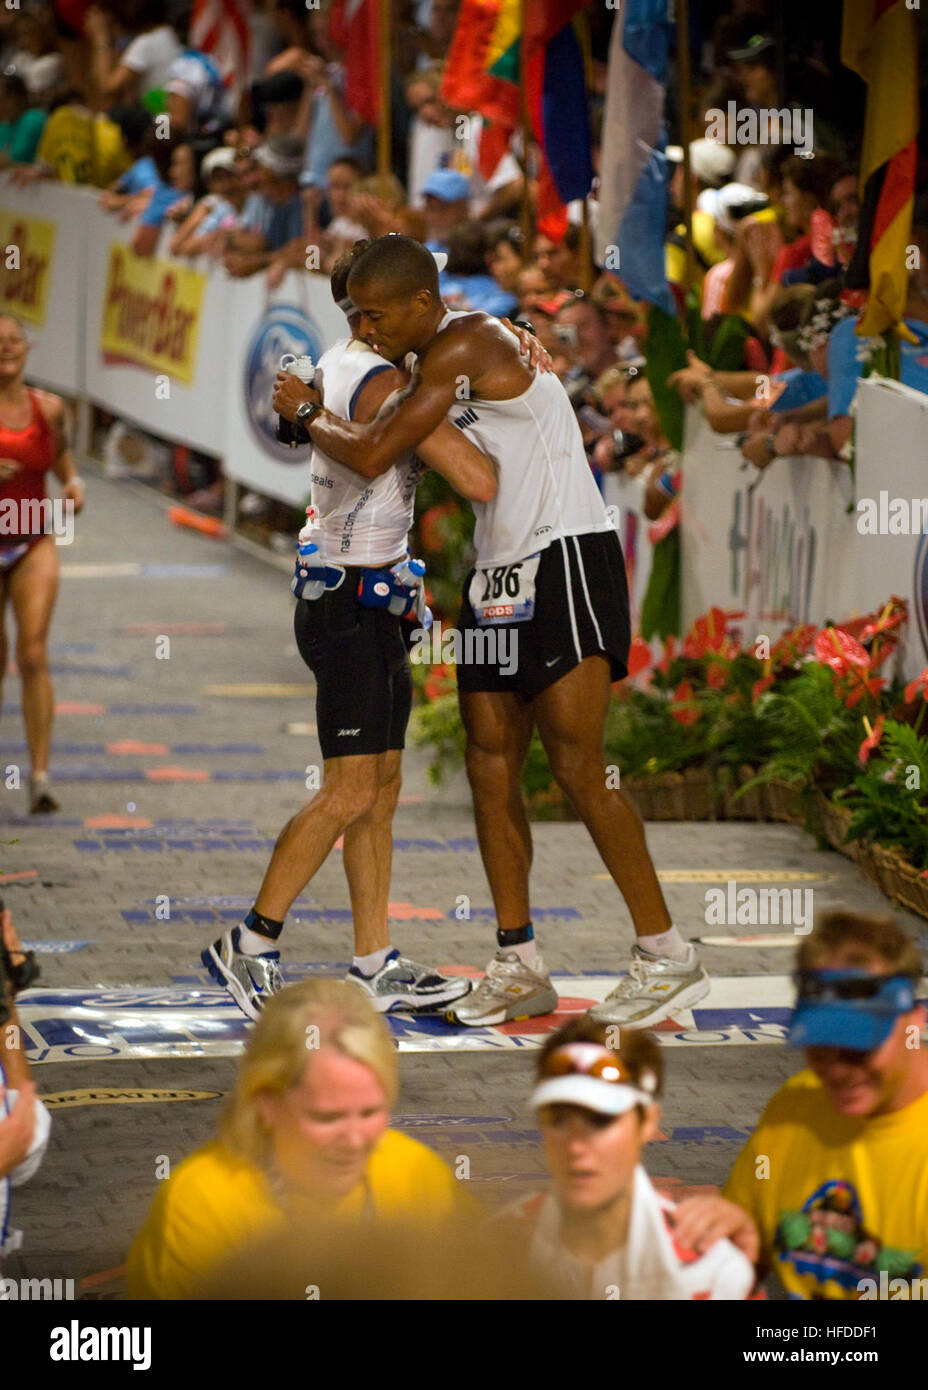 U.S. Navy Special Warfare Operator 1st Class (SEAL) David Goggins, right, assigned to Naval Special Warfare Center, embraces Cmdr. Keith Davids, commanding officer of SEAL Team One, as they cross the finish line Oct. 11, 2008, at the 30th Ford Ironman World Championship in Kailua-Kona, Hawaii. Six Sailors from the Navy athletic team and Naval Special Warfare competed alongside 1,800 elite athletes in the triathlon event, performing 2.4 miles of swimming, 112 miles of biking and a 26.2-mile marathon run through ocean currents and lava-covered terrain. (U.S. Navy photo by Mass Communication Spec Stock Photo